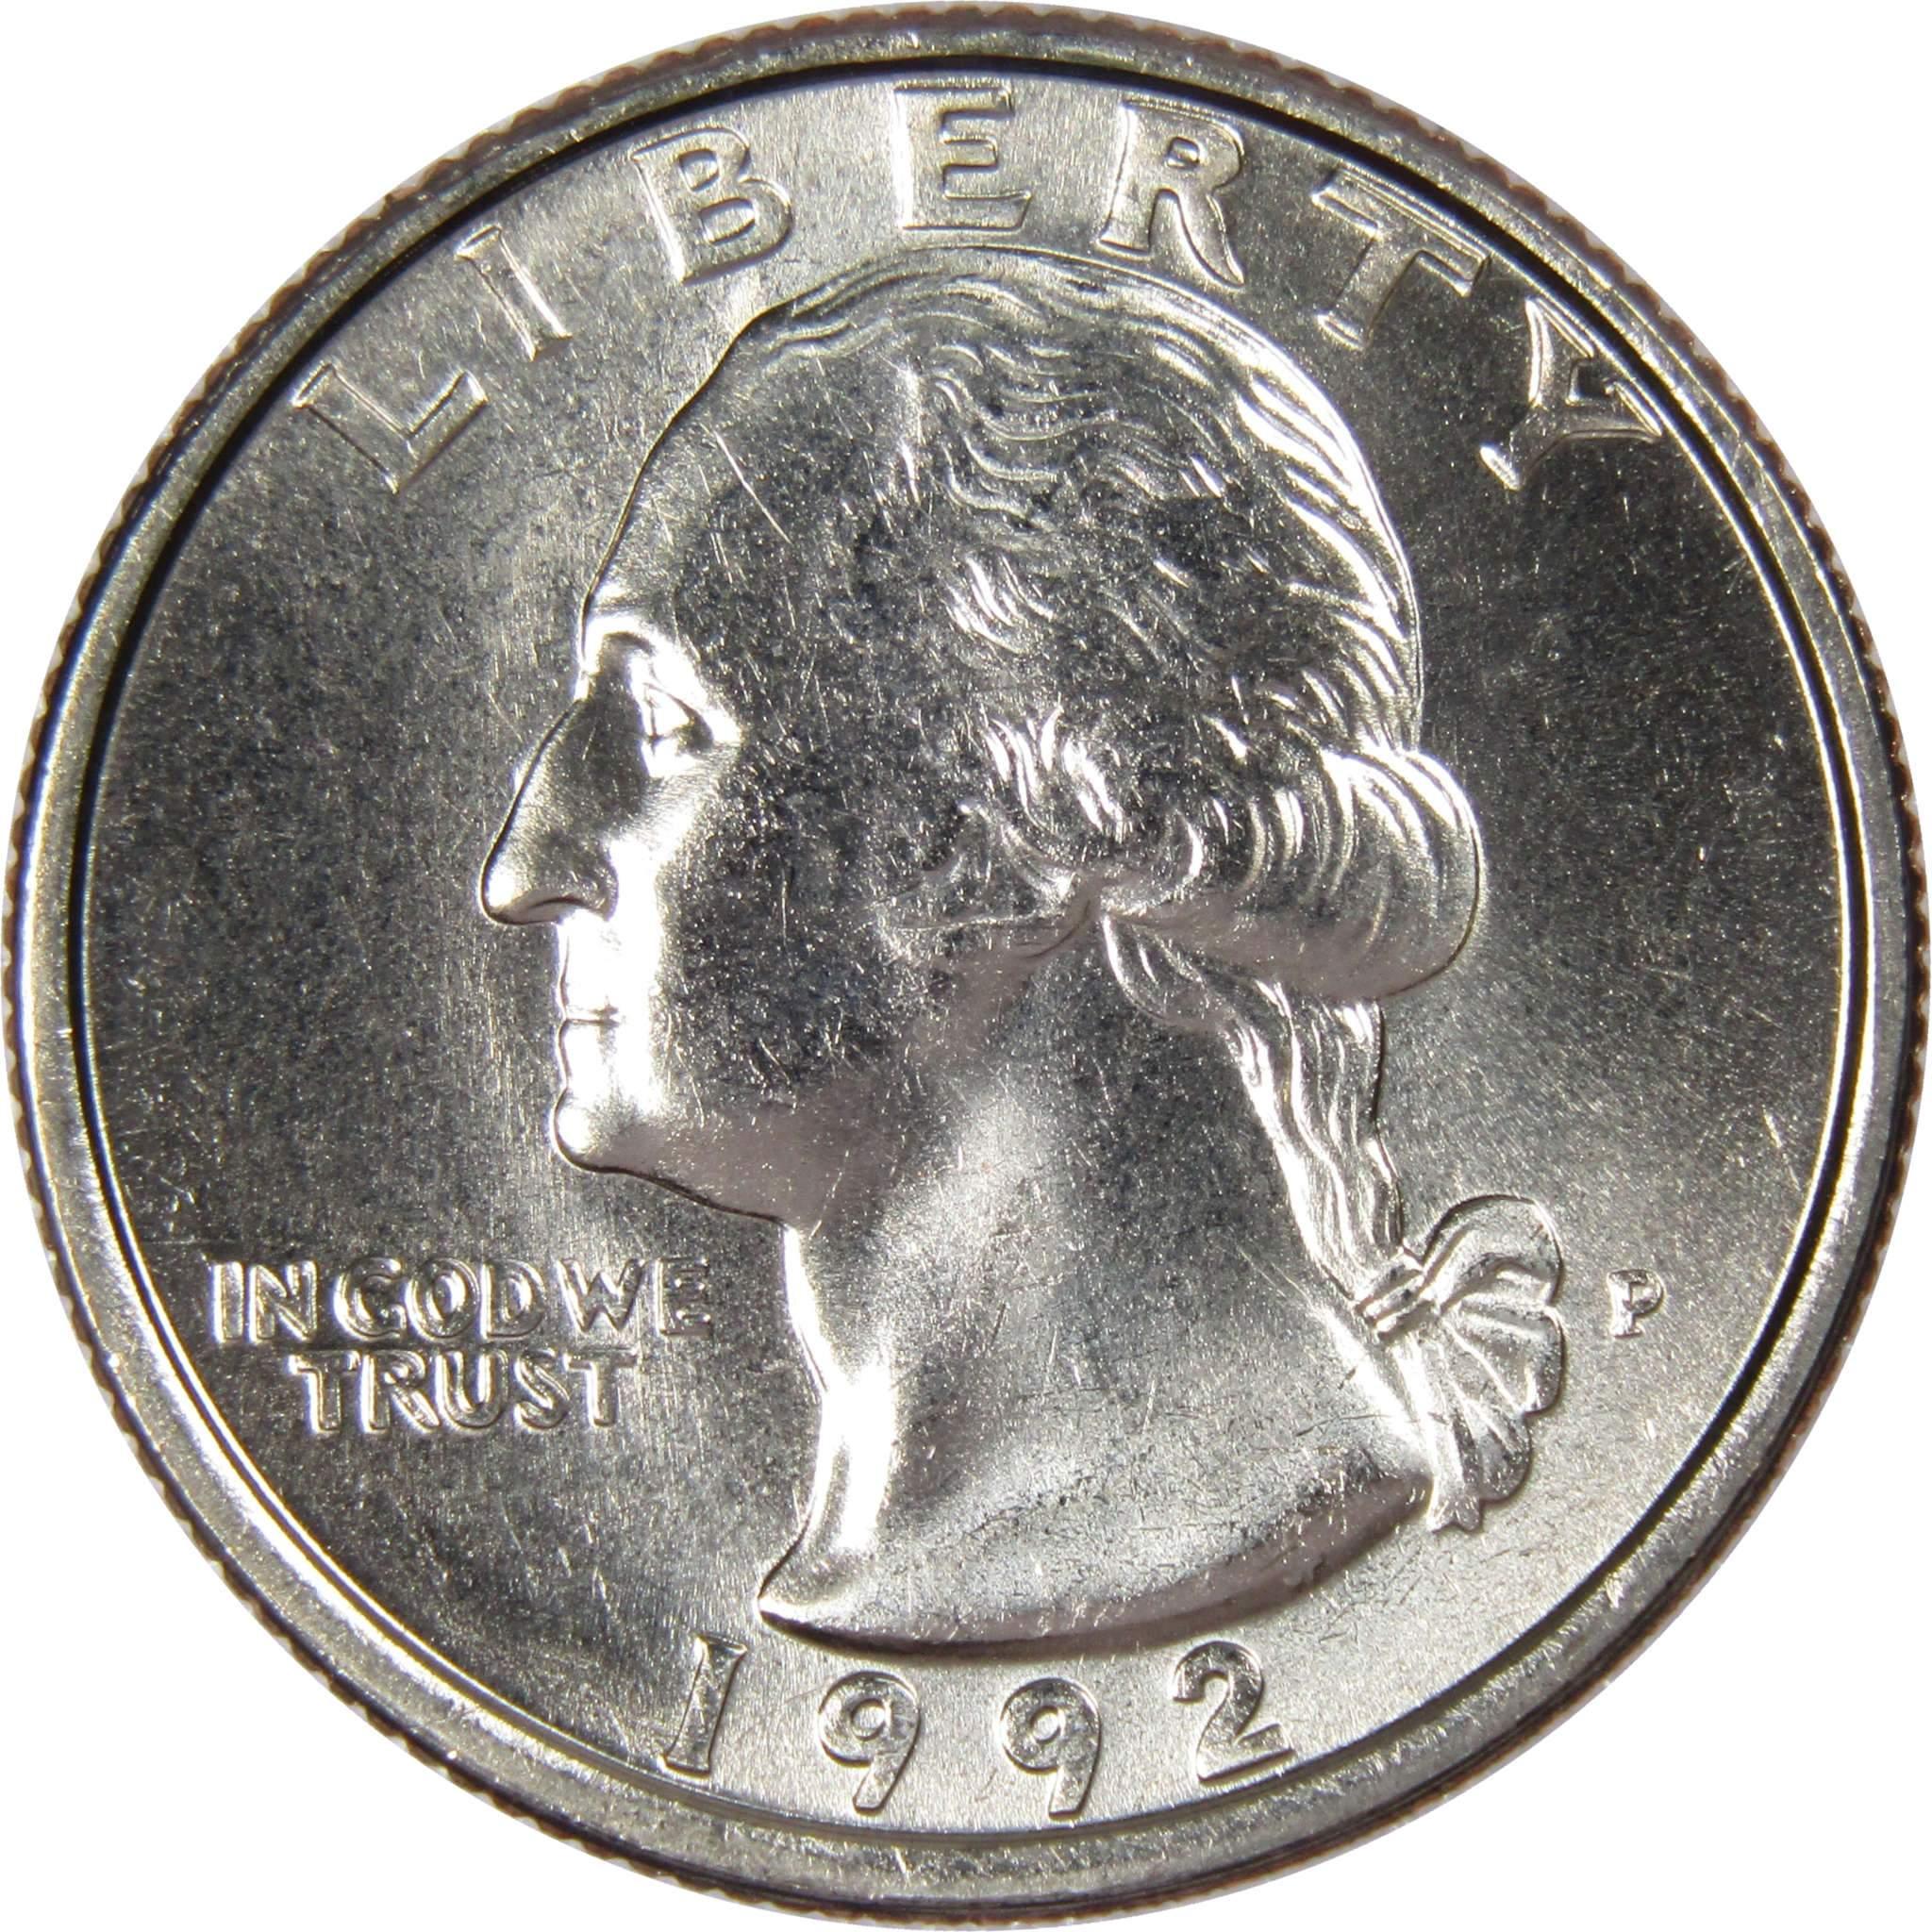 1992 P Washington Quarter BU Uncirculated Mint State 25c US Coin Collectible